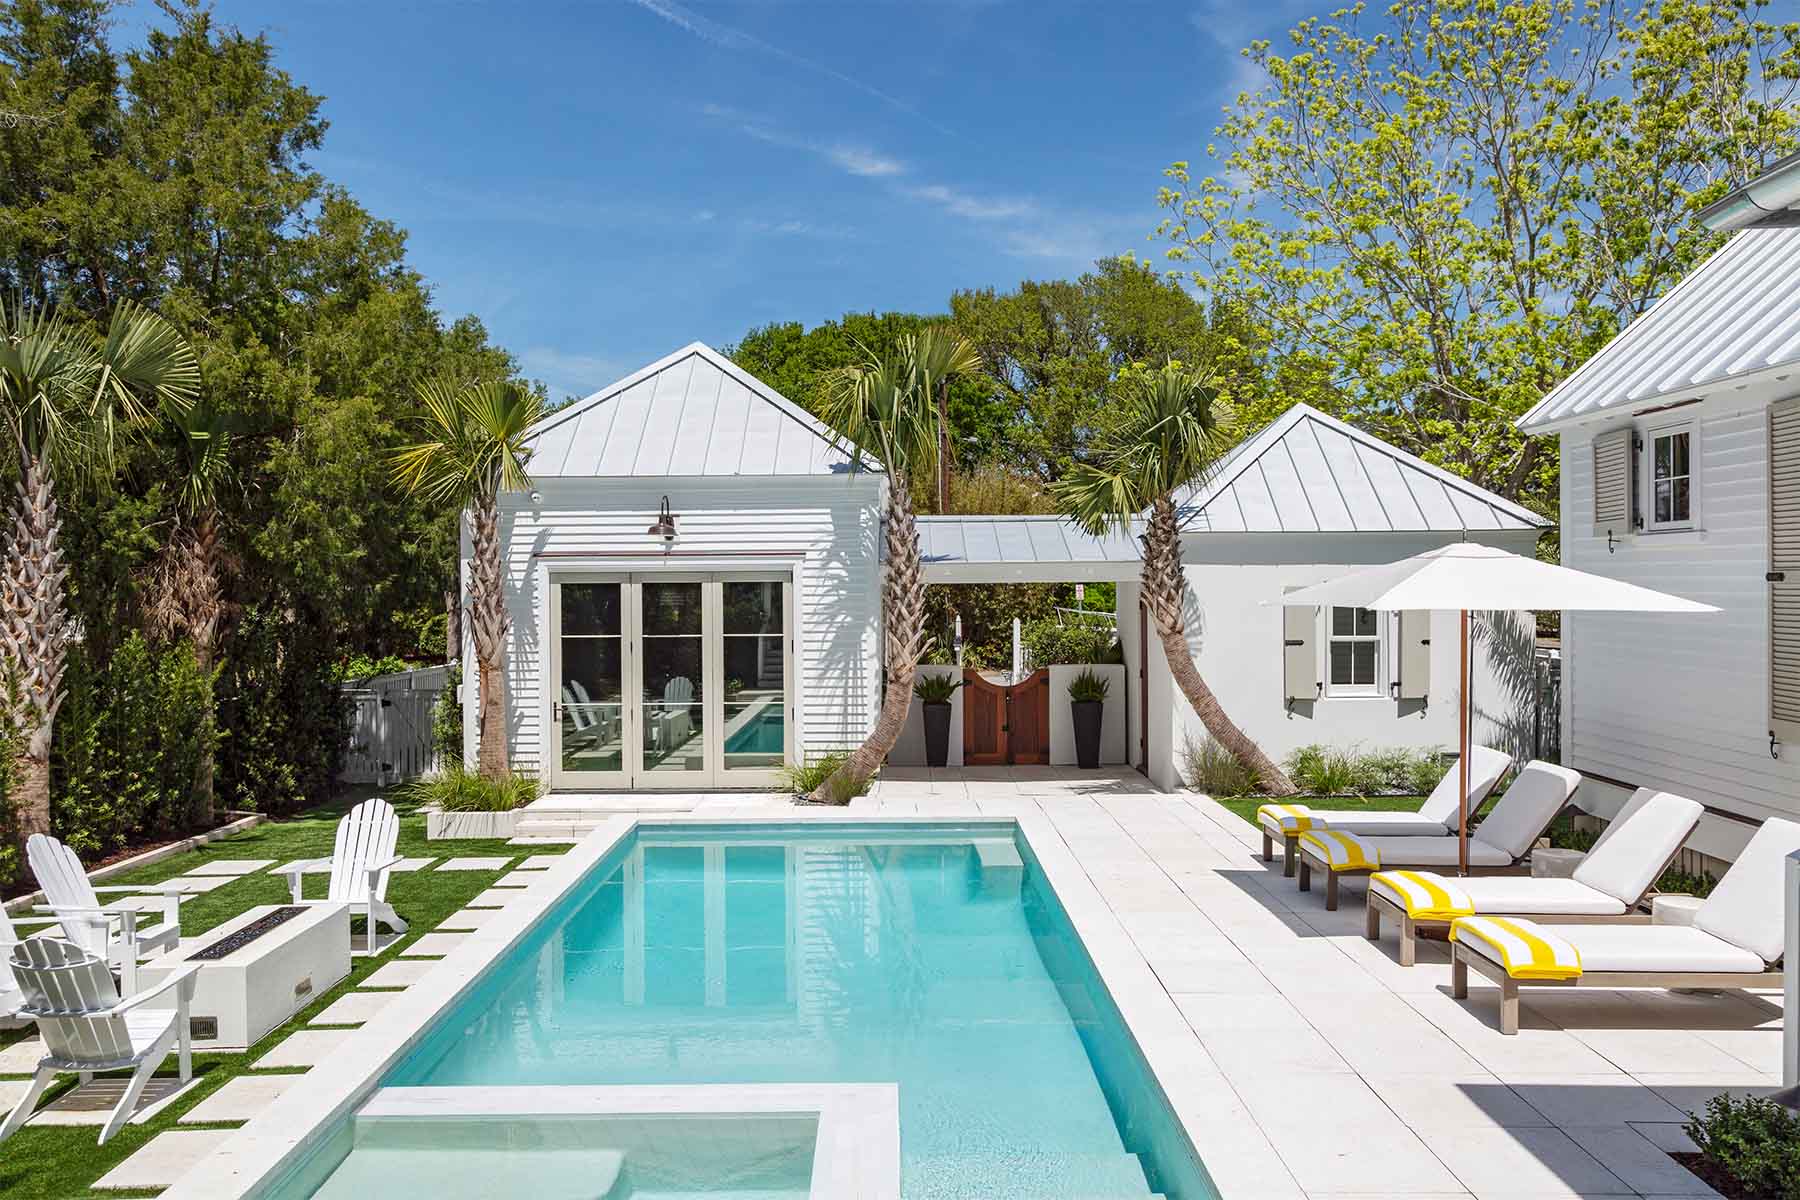 The property features design from sullivan's island landscape architect